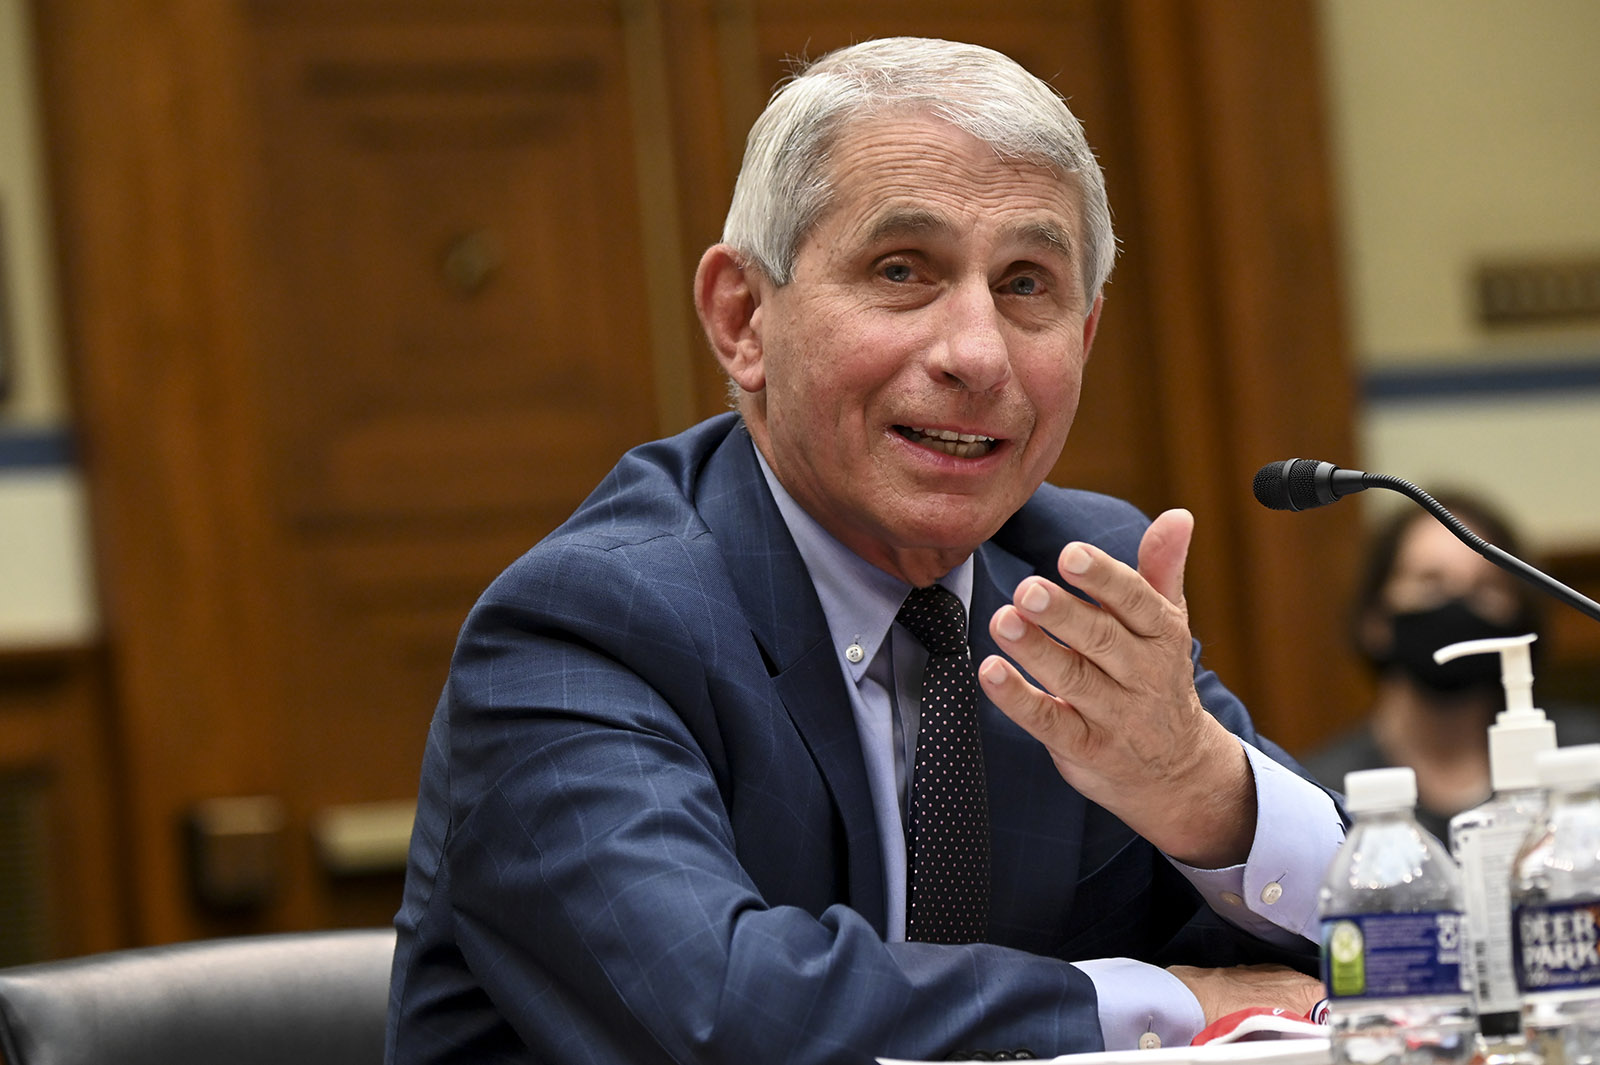 Anthony Fauci, director of the National Institute of Allergy and Infectious Diseases, testifies during a House Select Subcommittee on the Coronavirus Crisis hearing on July 31 in Washington.